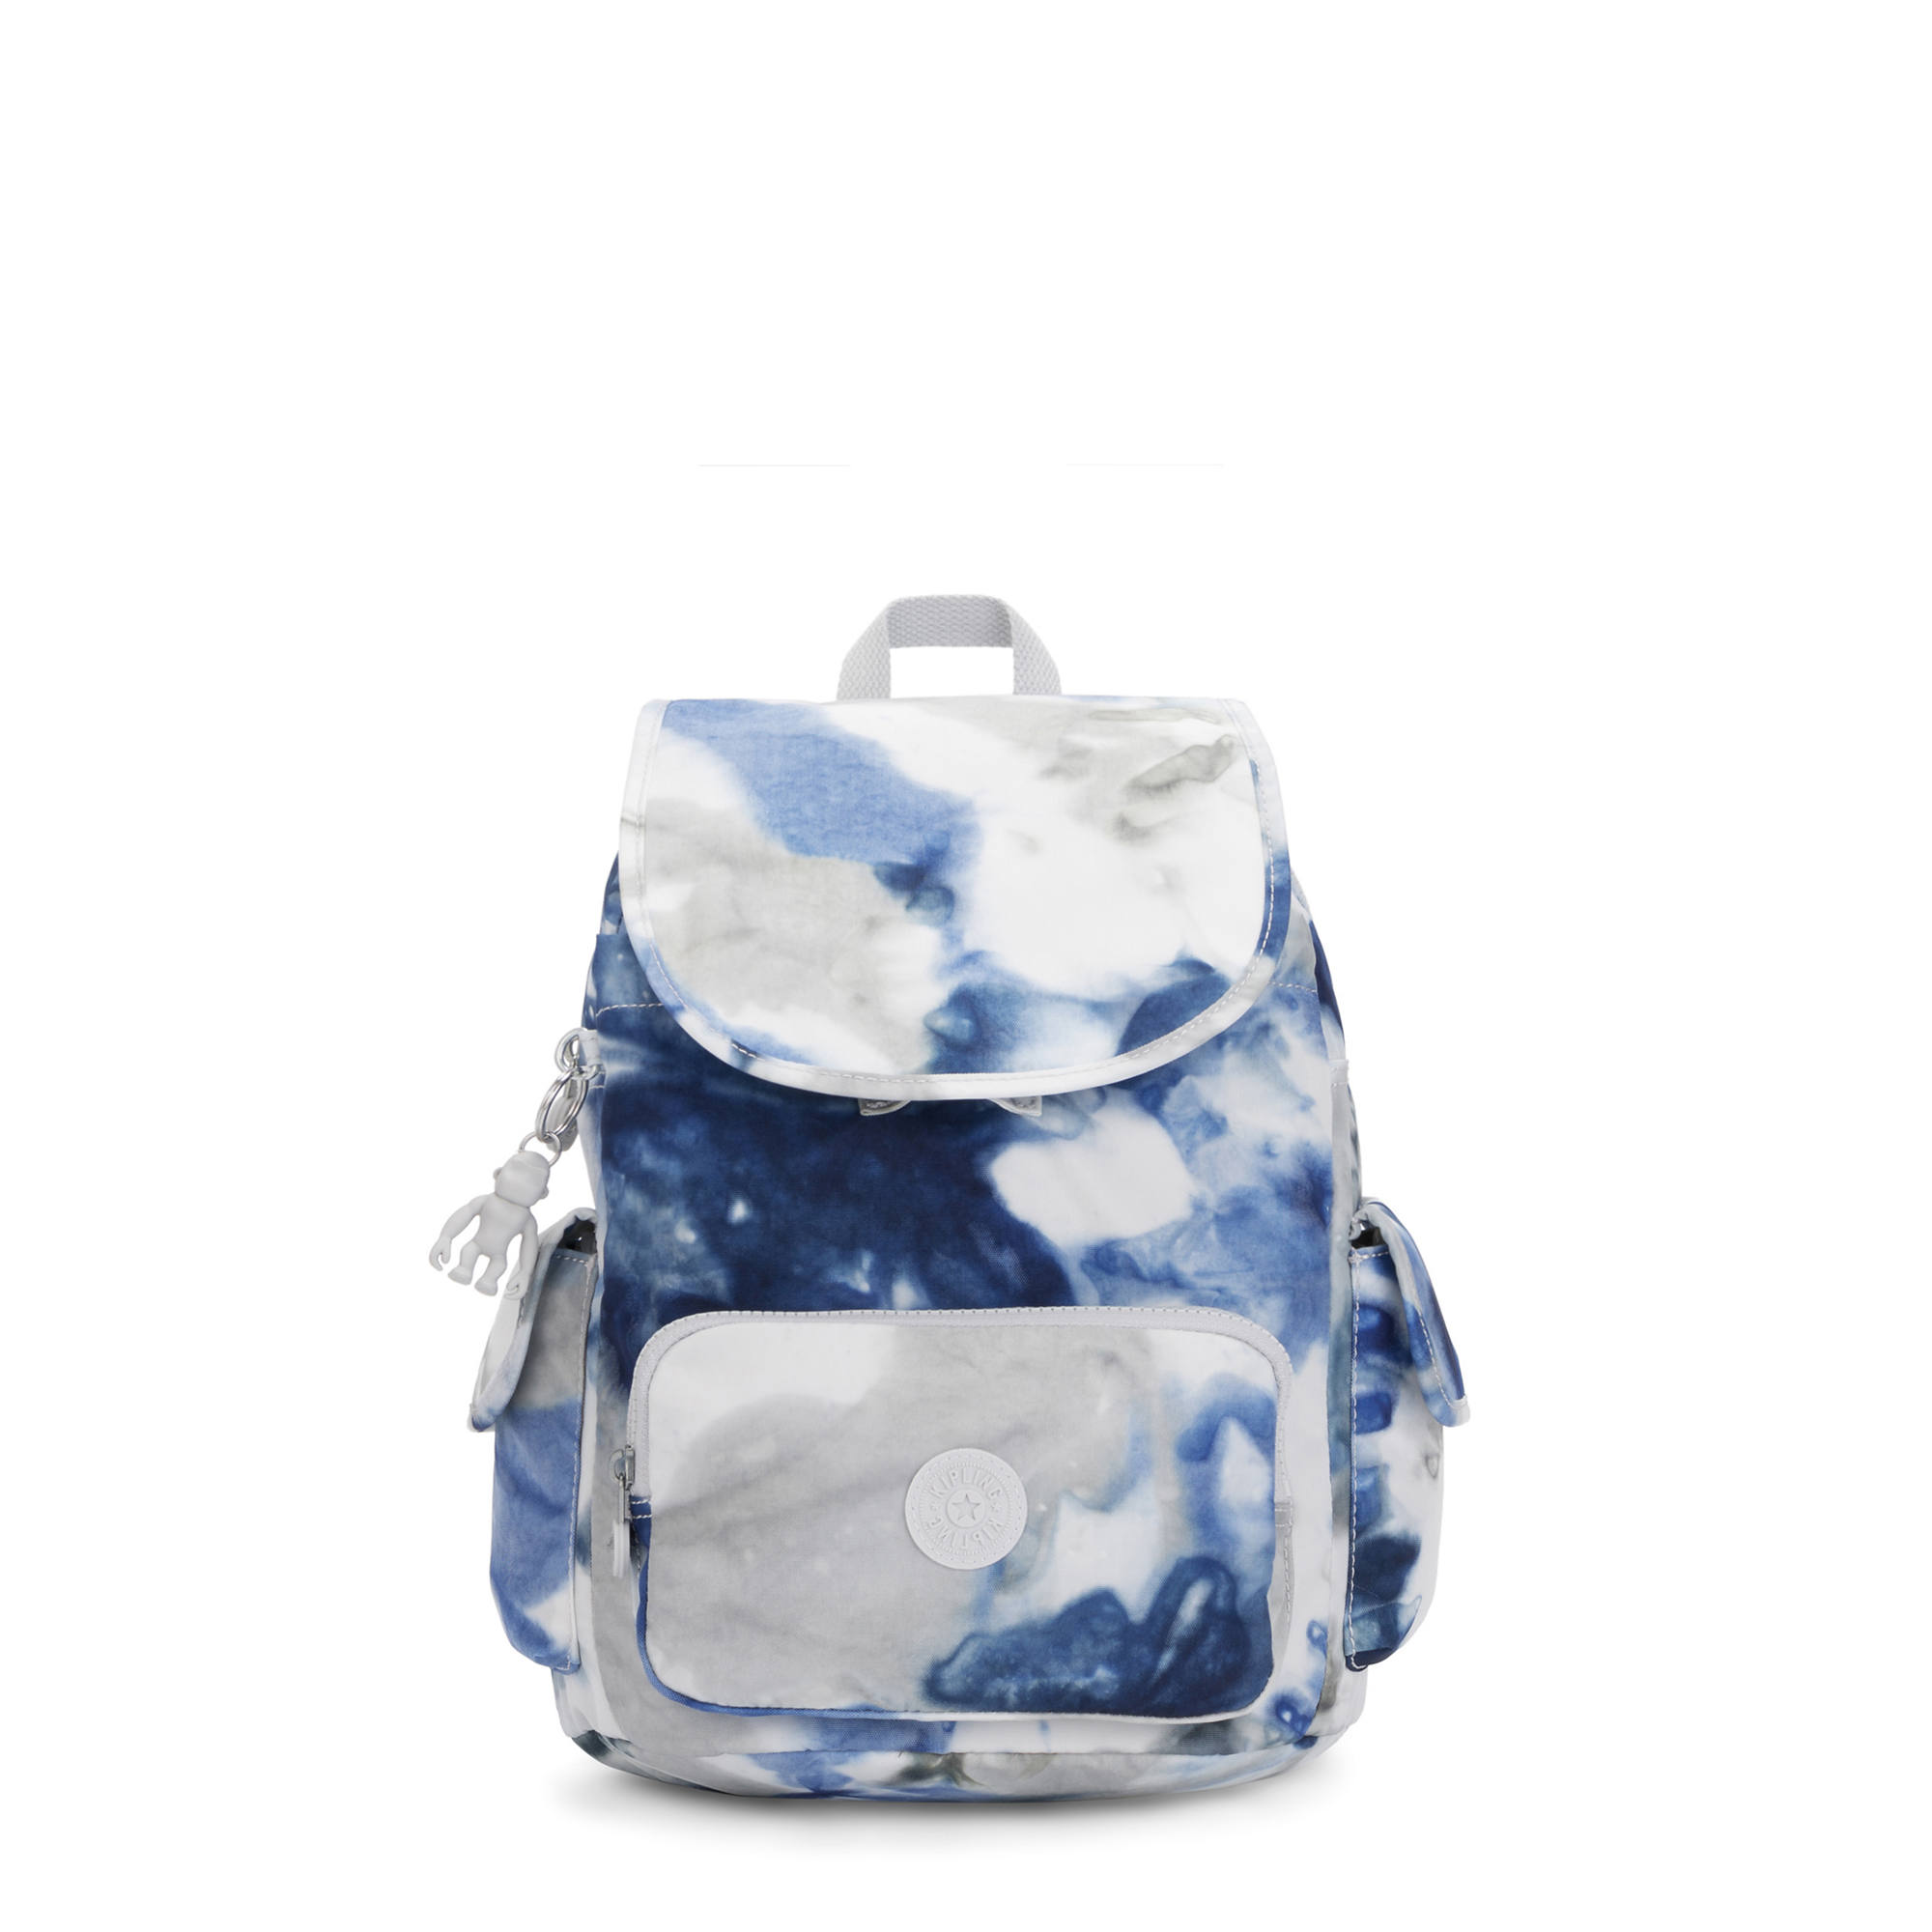 City Pack Small Printed Backpack,Tie Dye Blue,large-zoomed